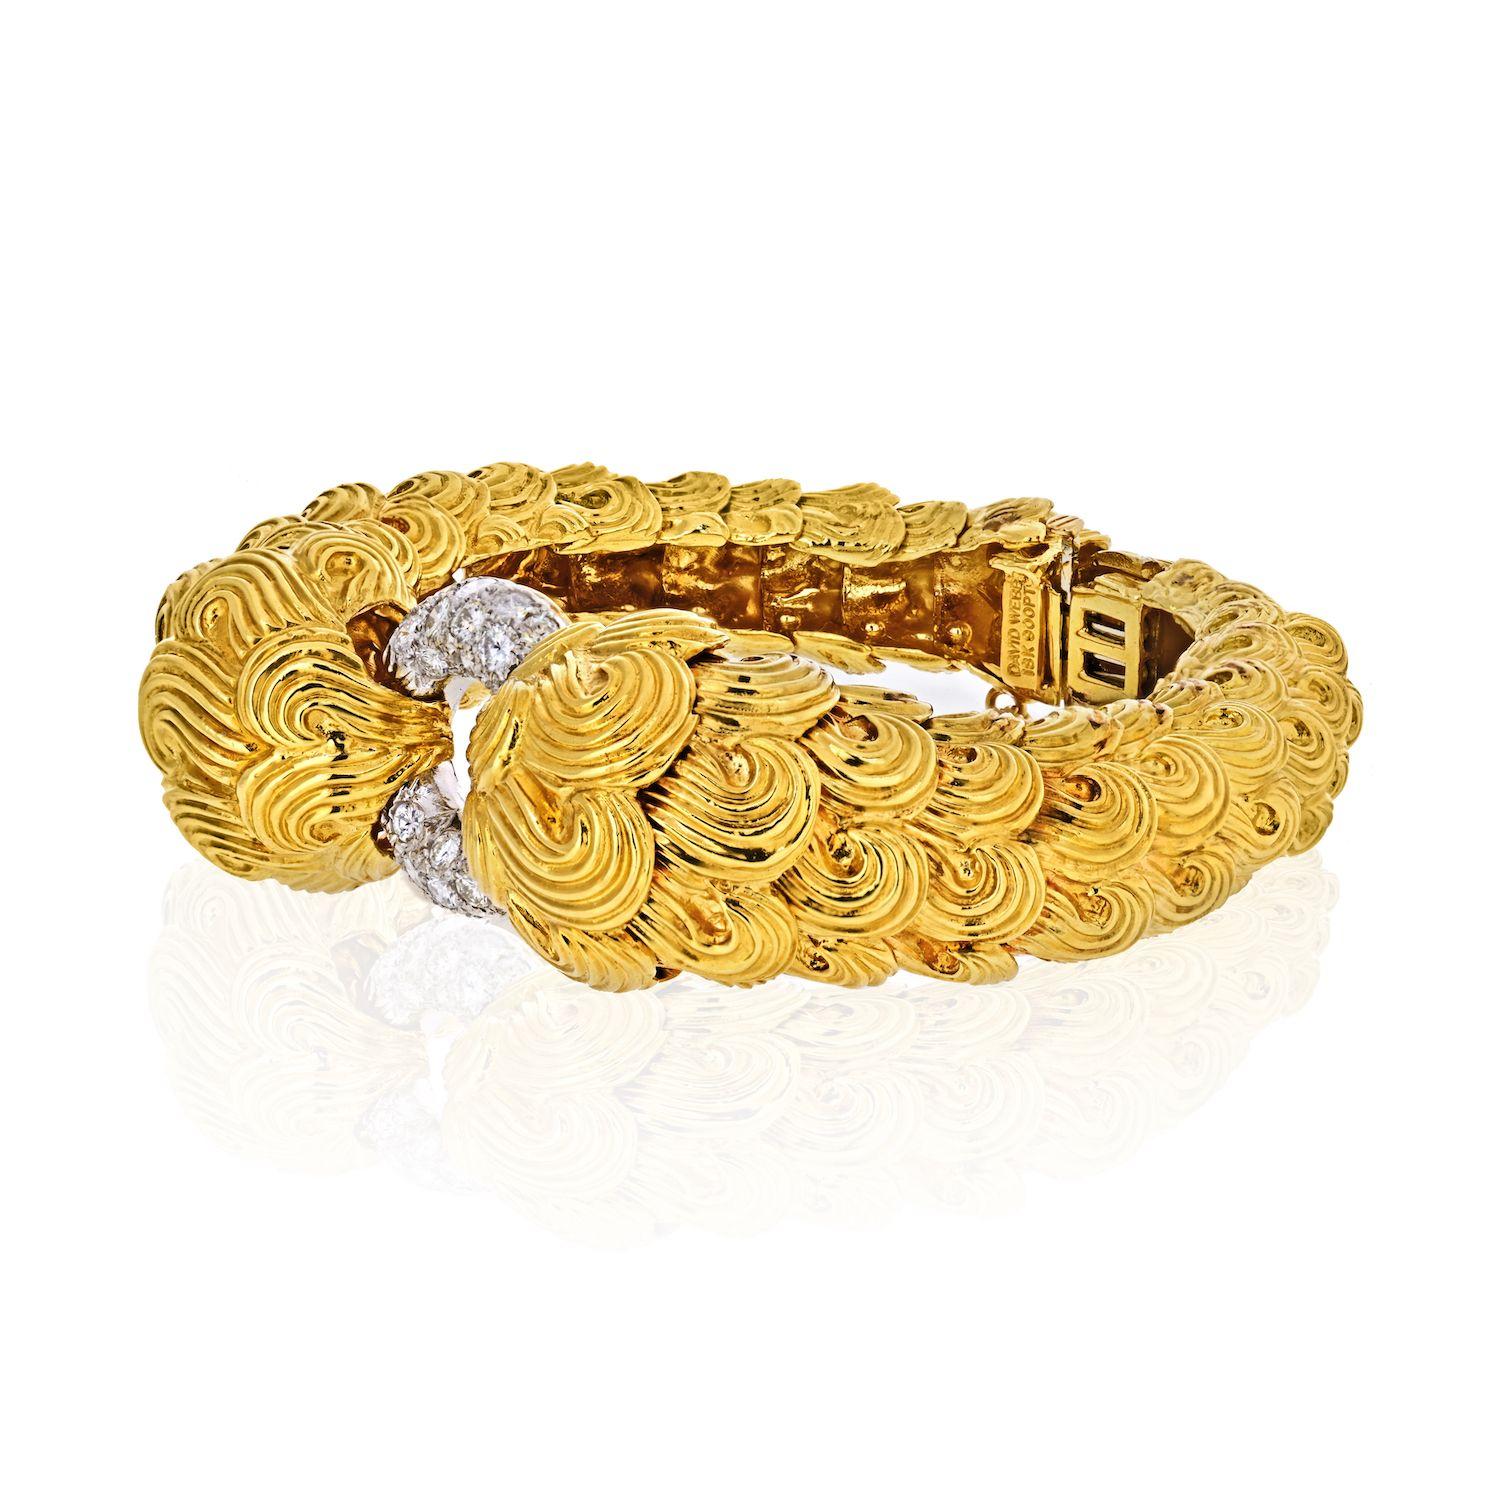 David Webb vintage bracelet designed as a hinged bangle, with two opposing textured gold sides in the 18k scroll textured gold. This bangle joined at the top by a circular-cut diamond hoop, 2 ins. diameter.
